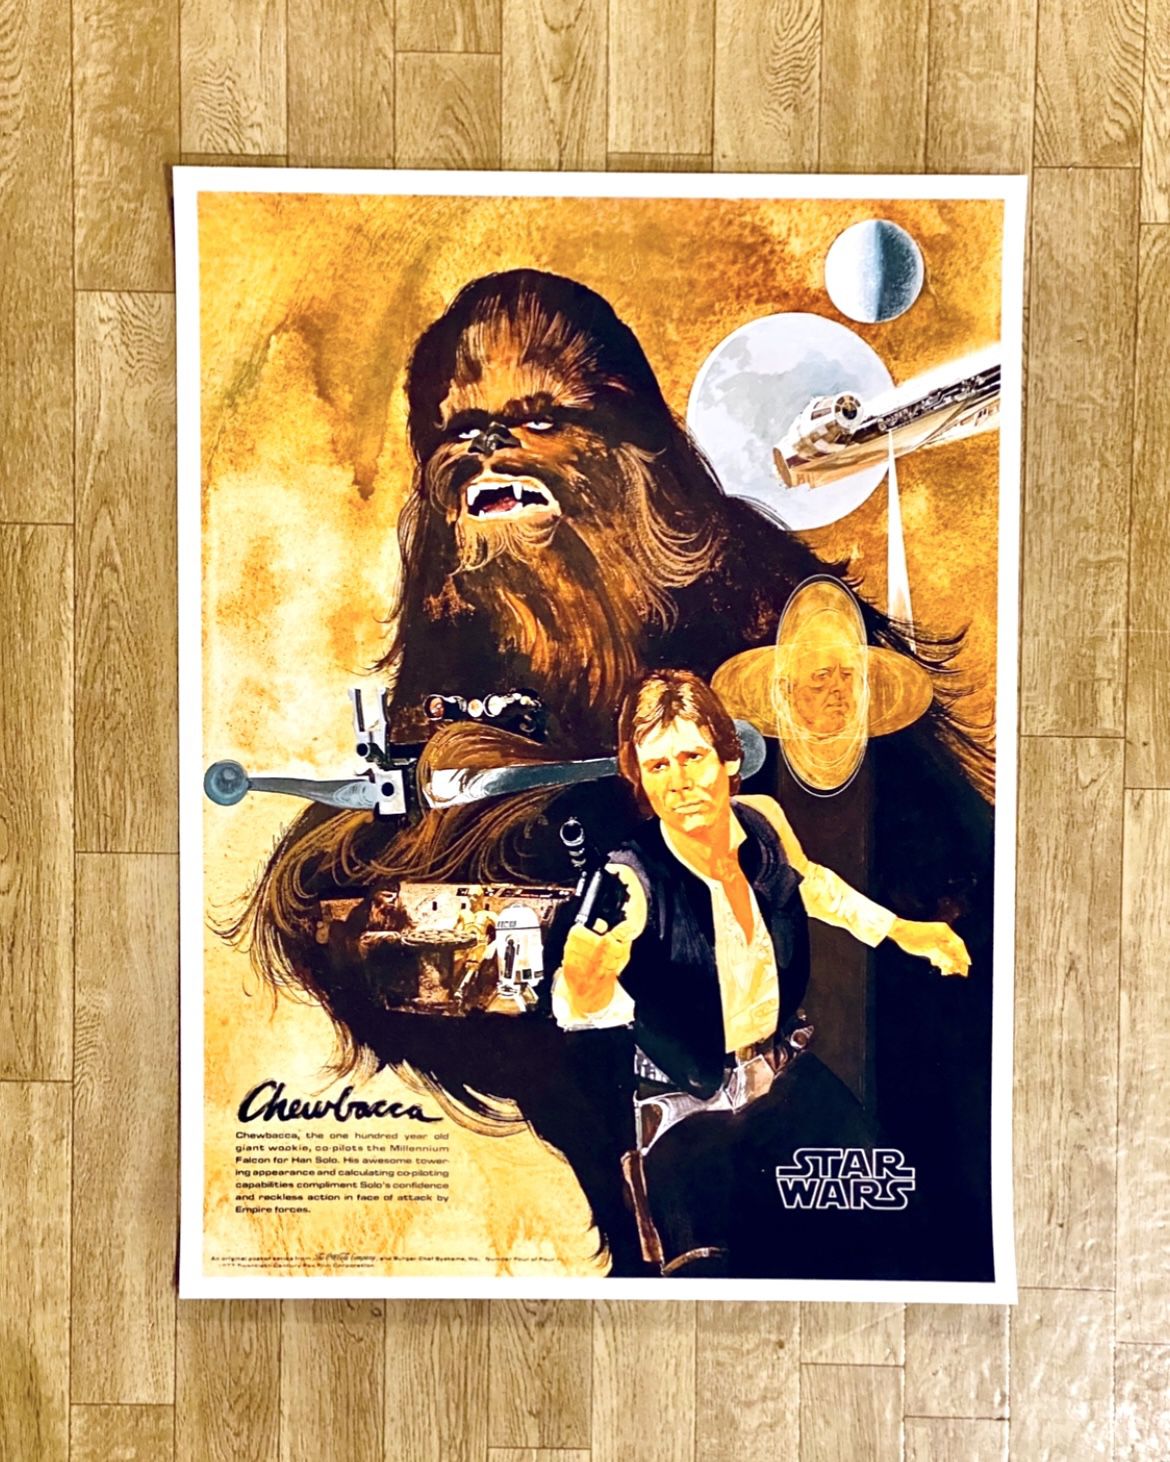 Star Wars Poster Reproduction - 18” X 24” - New 